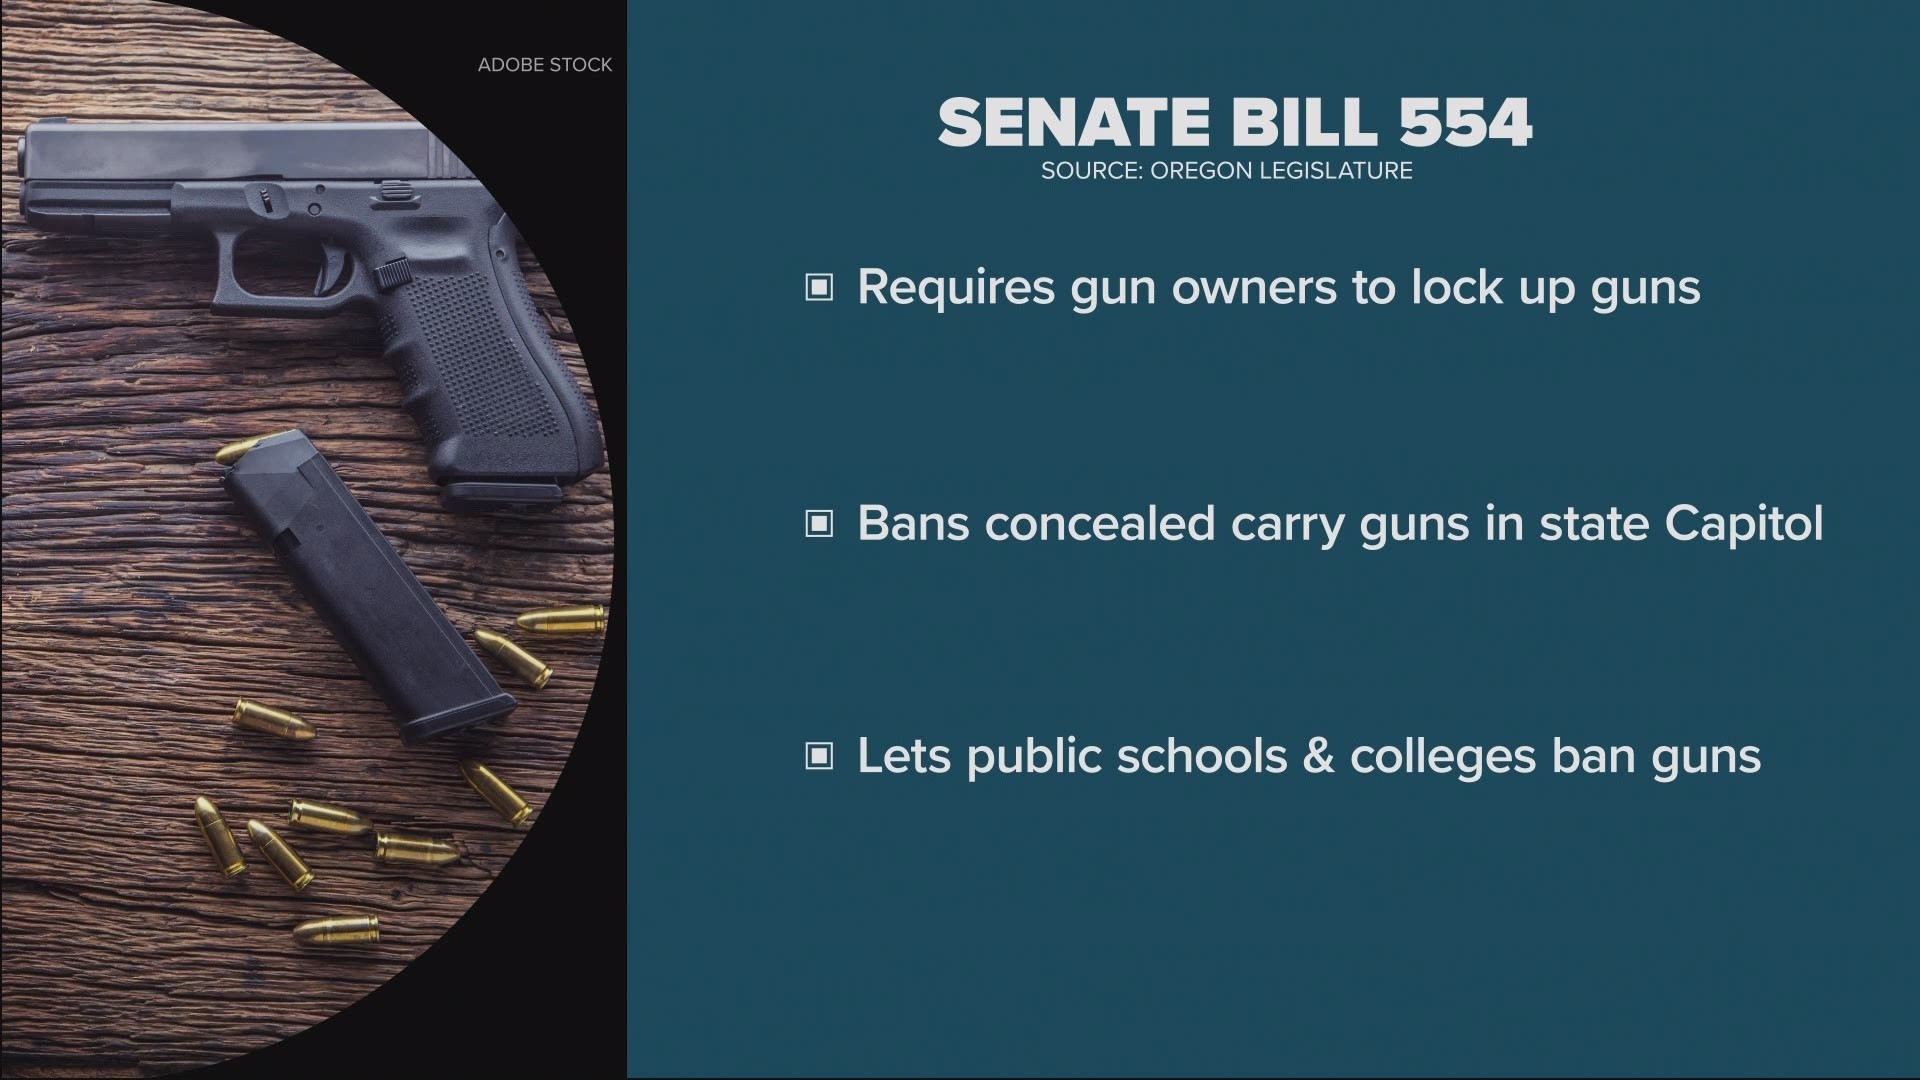 The Oregon house just passed new gun legislation after lawmakers in both parties received threats over it.